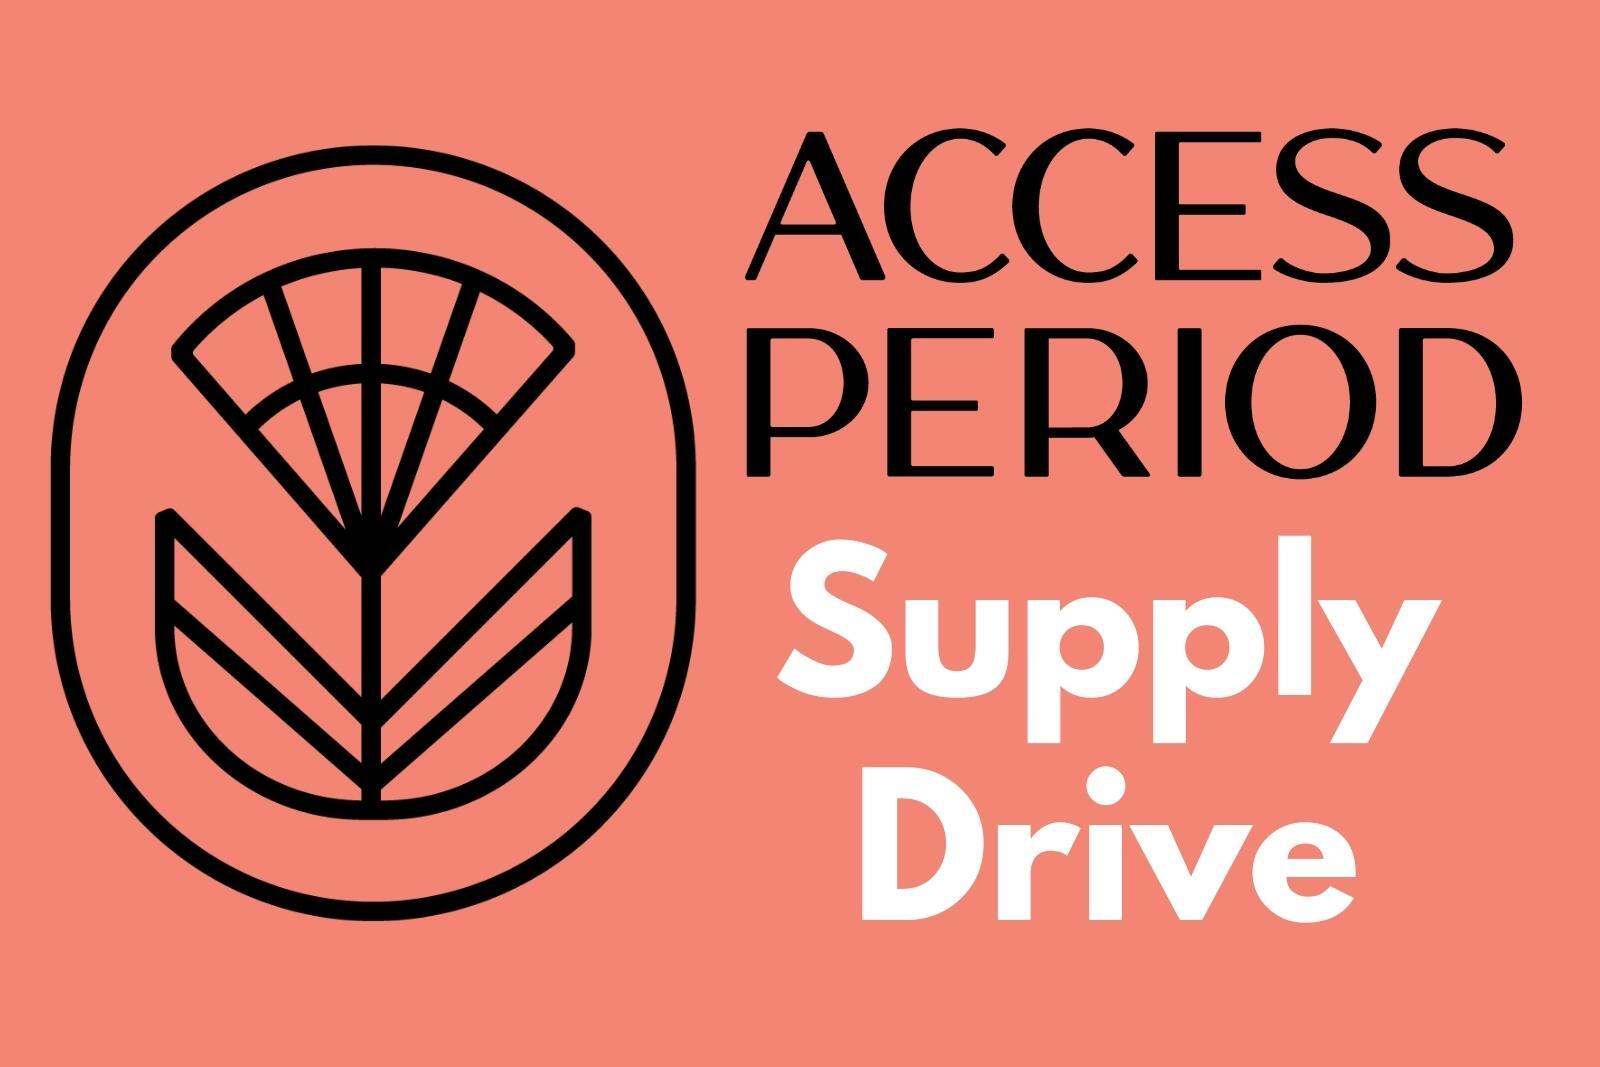 Acces Period Supply Drive against a pink background